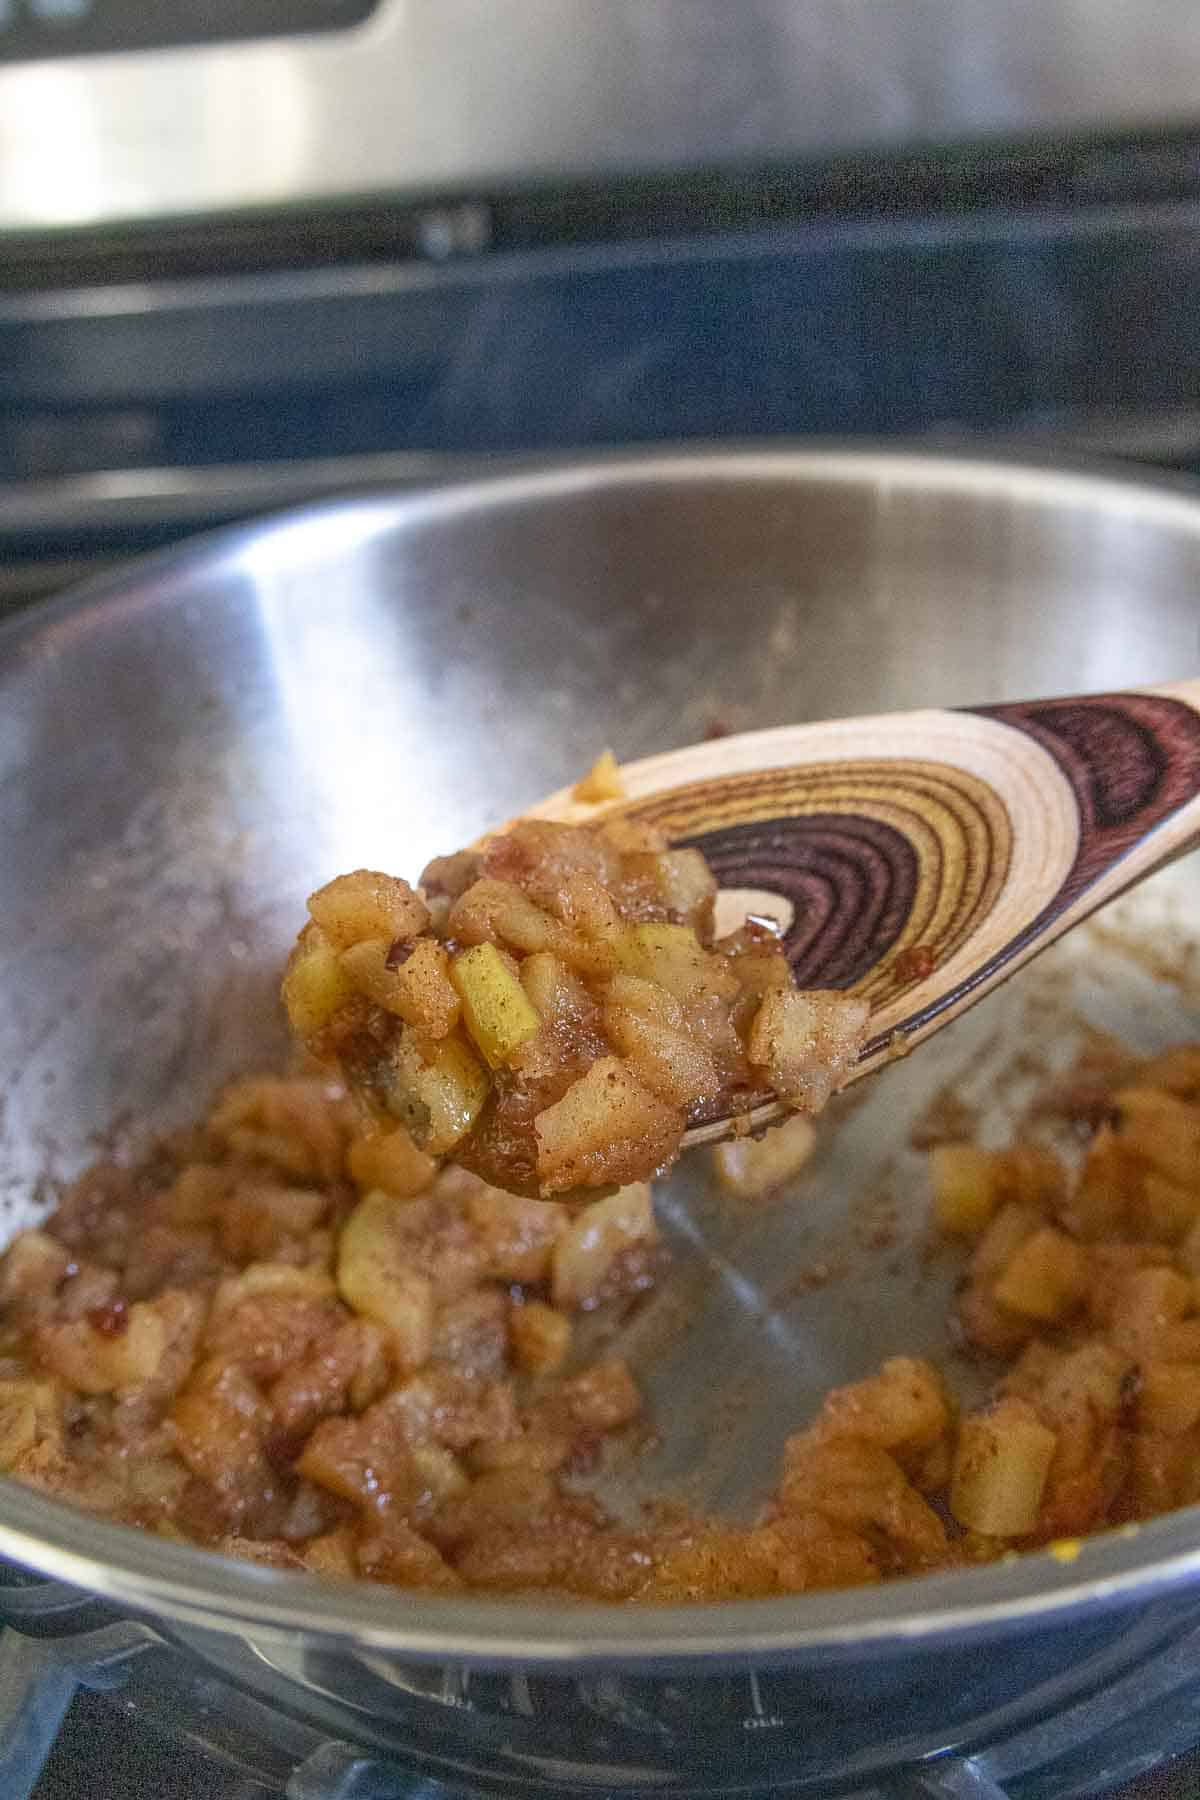 Spoonful of apple compote after cooking, above saute pan.